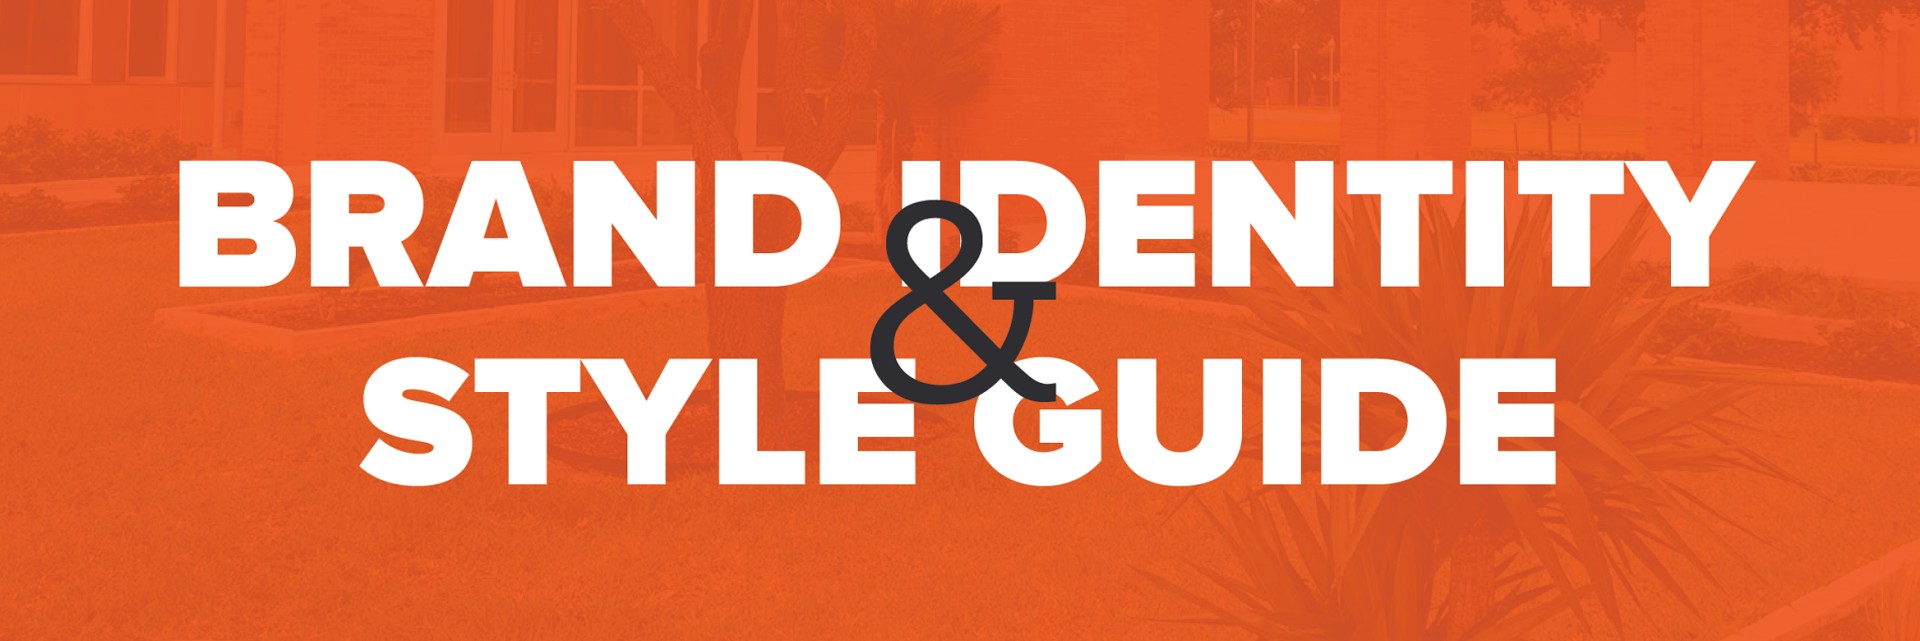 Brand Identity & Style Guide